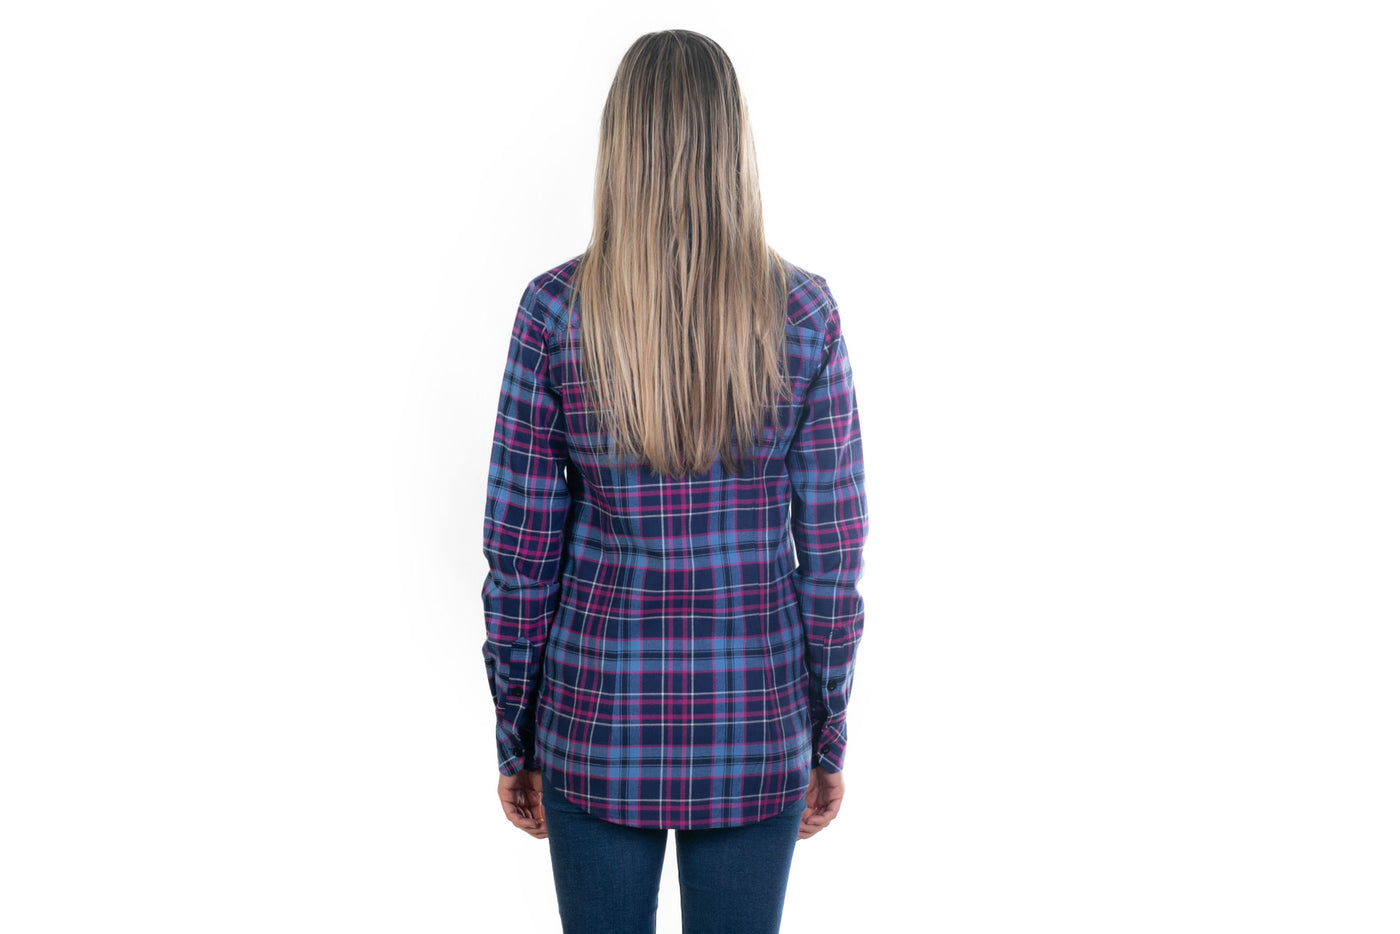 Women's Every Day Flannel Shirt- Bandit Blue